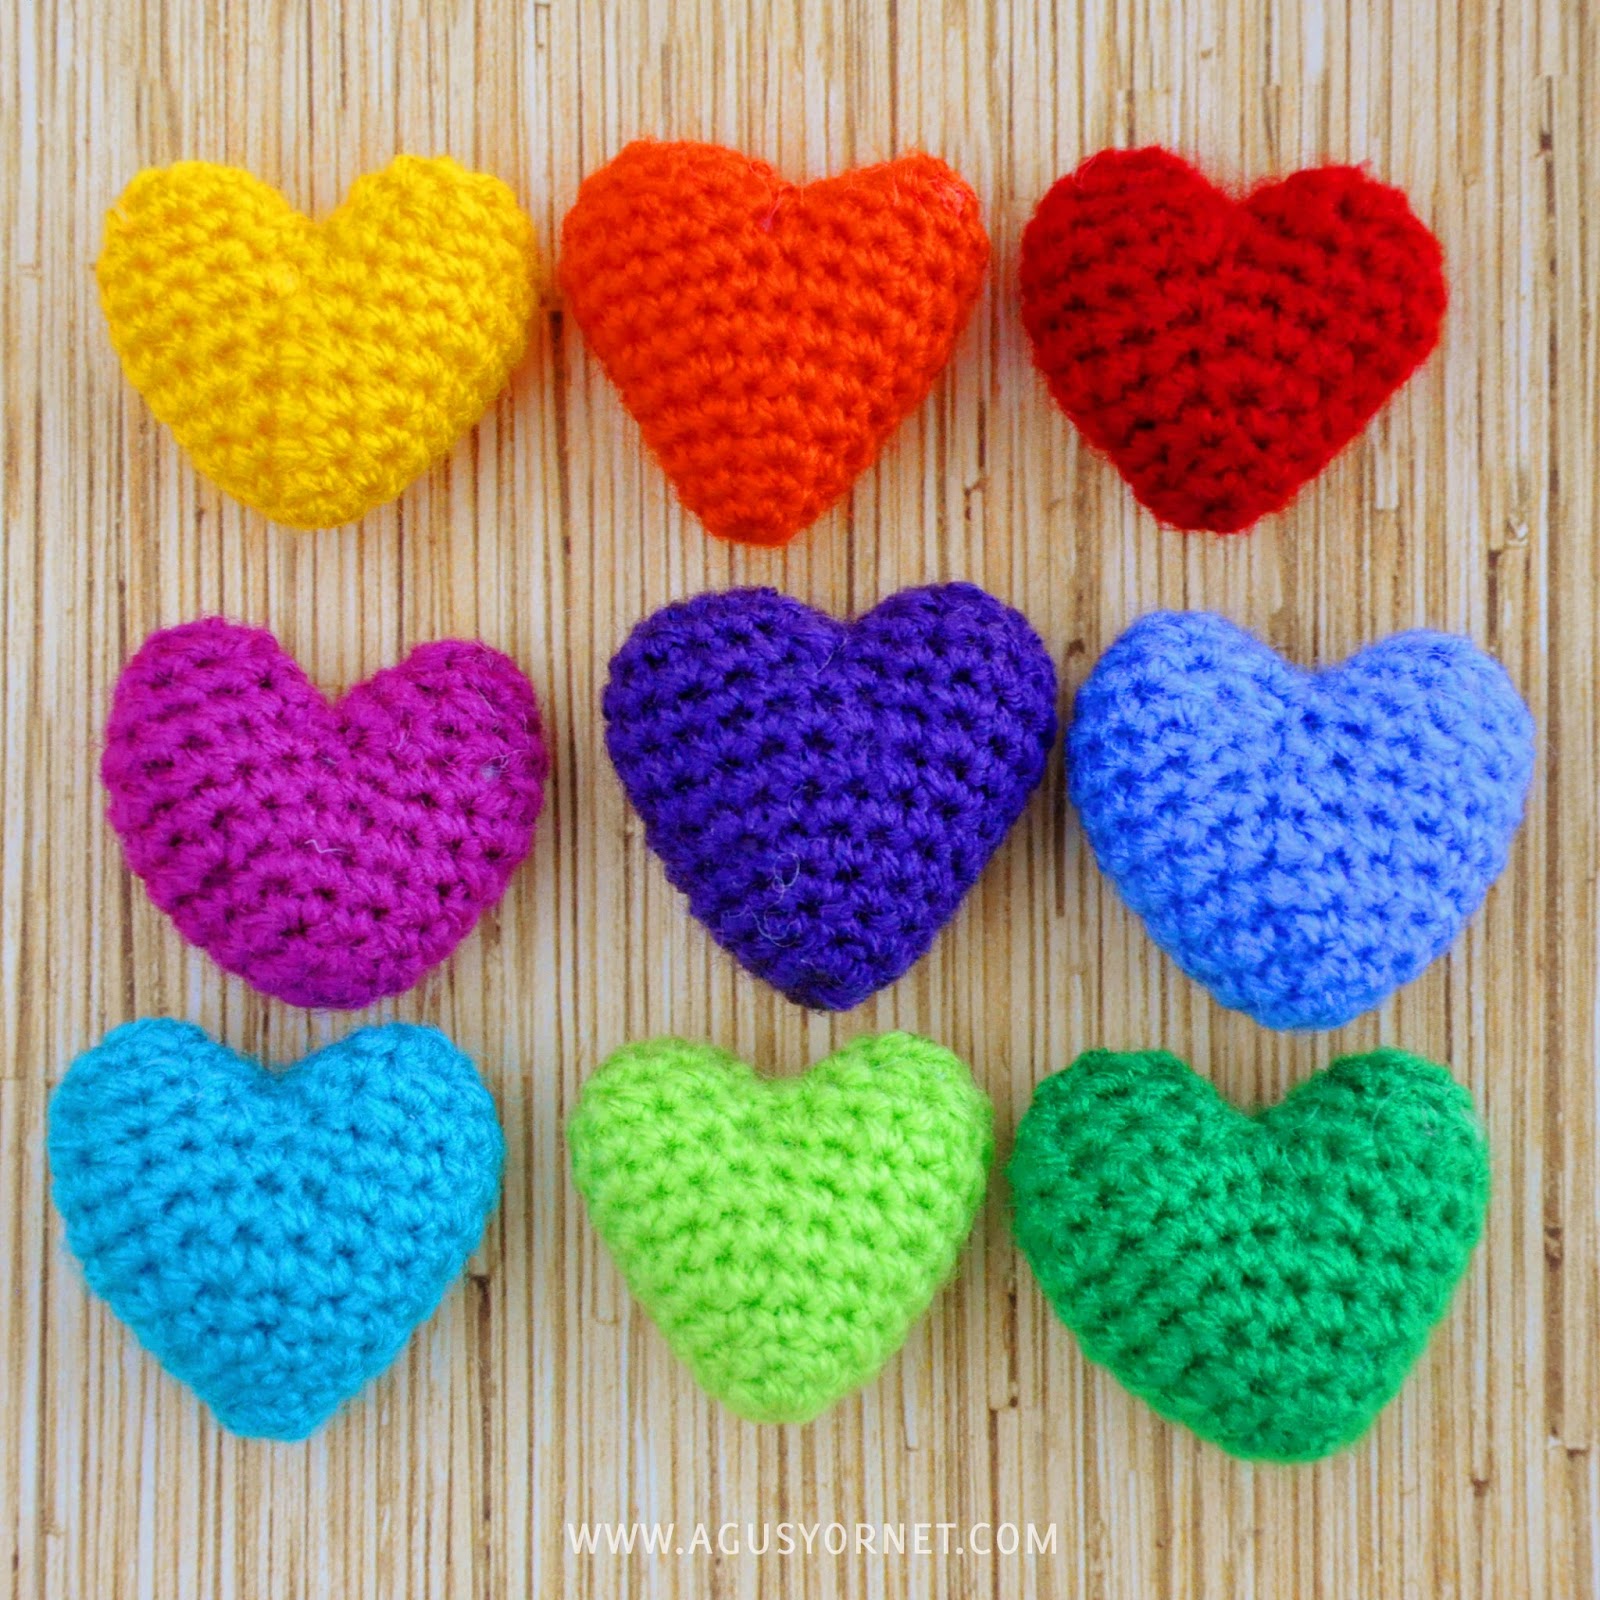 Made with love by Agus Y.: DIY: Corazonctios tejidos a Crochet ...